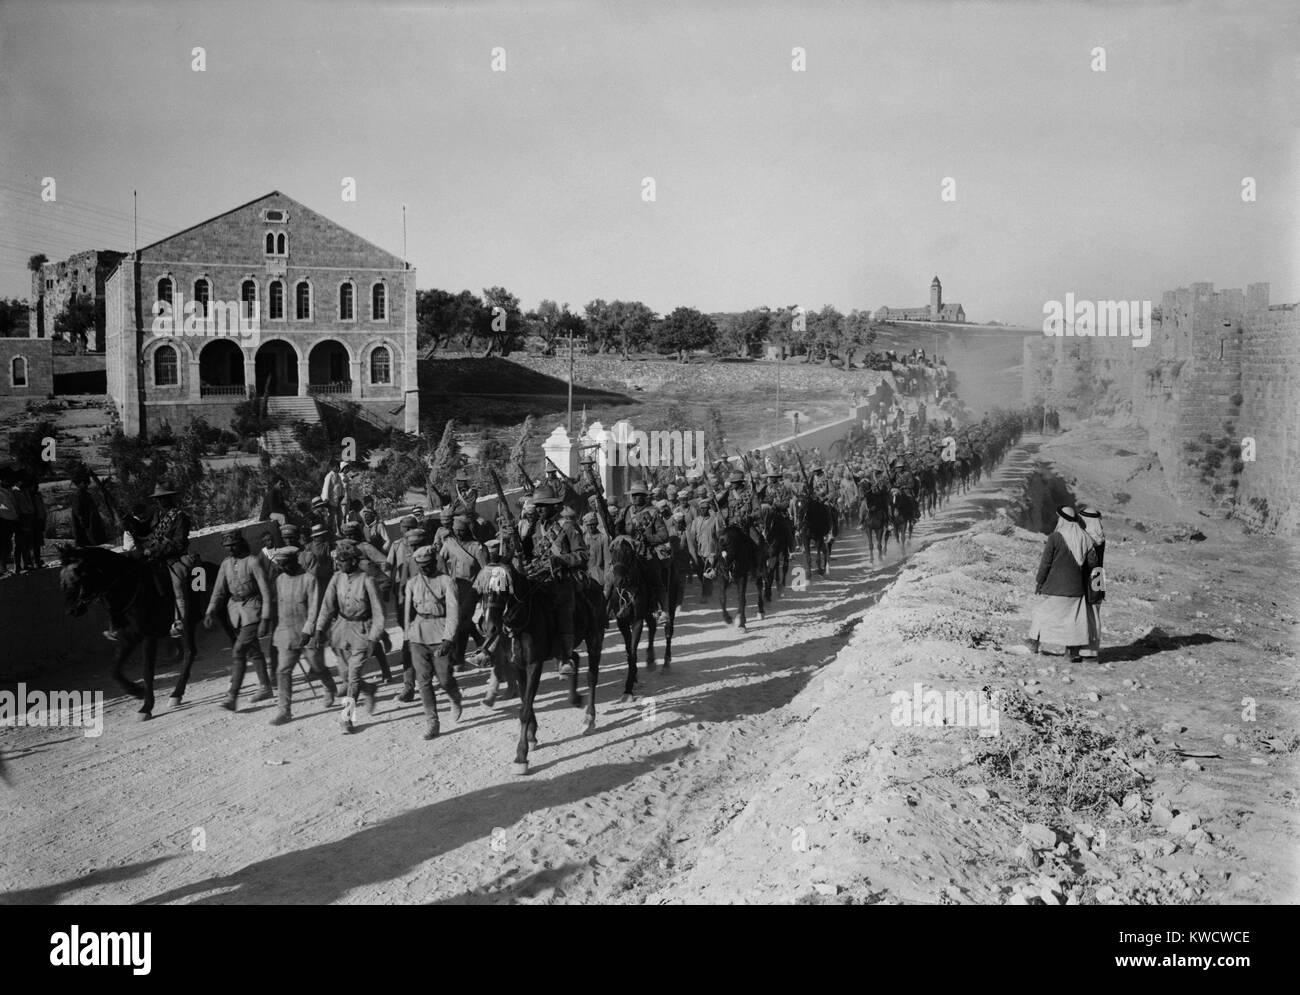 World War 1 in the Middle East. Australian cavalry guard German officers heading a line of 600 prisoners captured in the Battle of Jericho, Feb. 19-21, 1918. (BSLOC 2013 1 73) Stock Photo